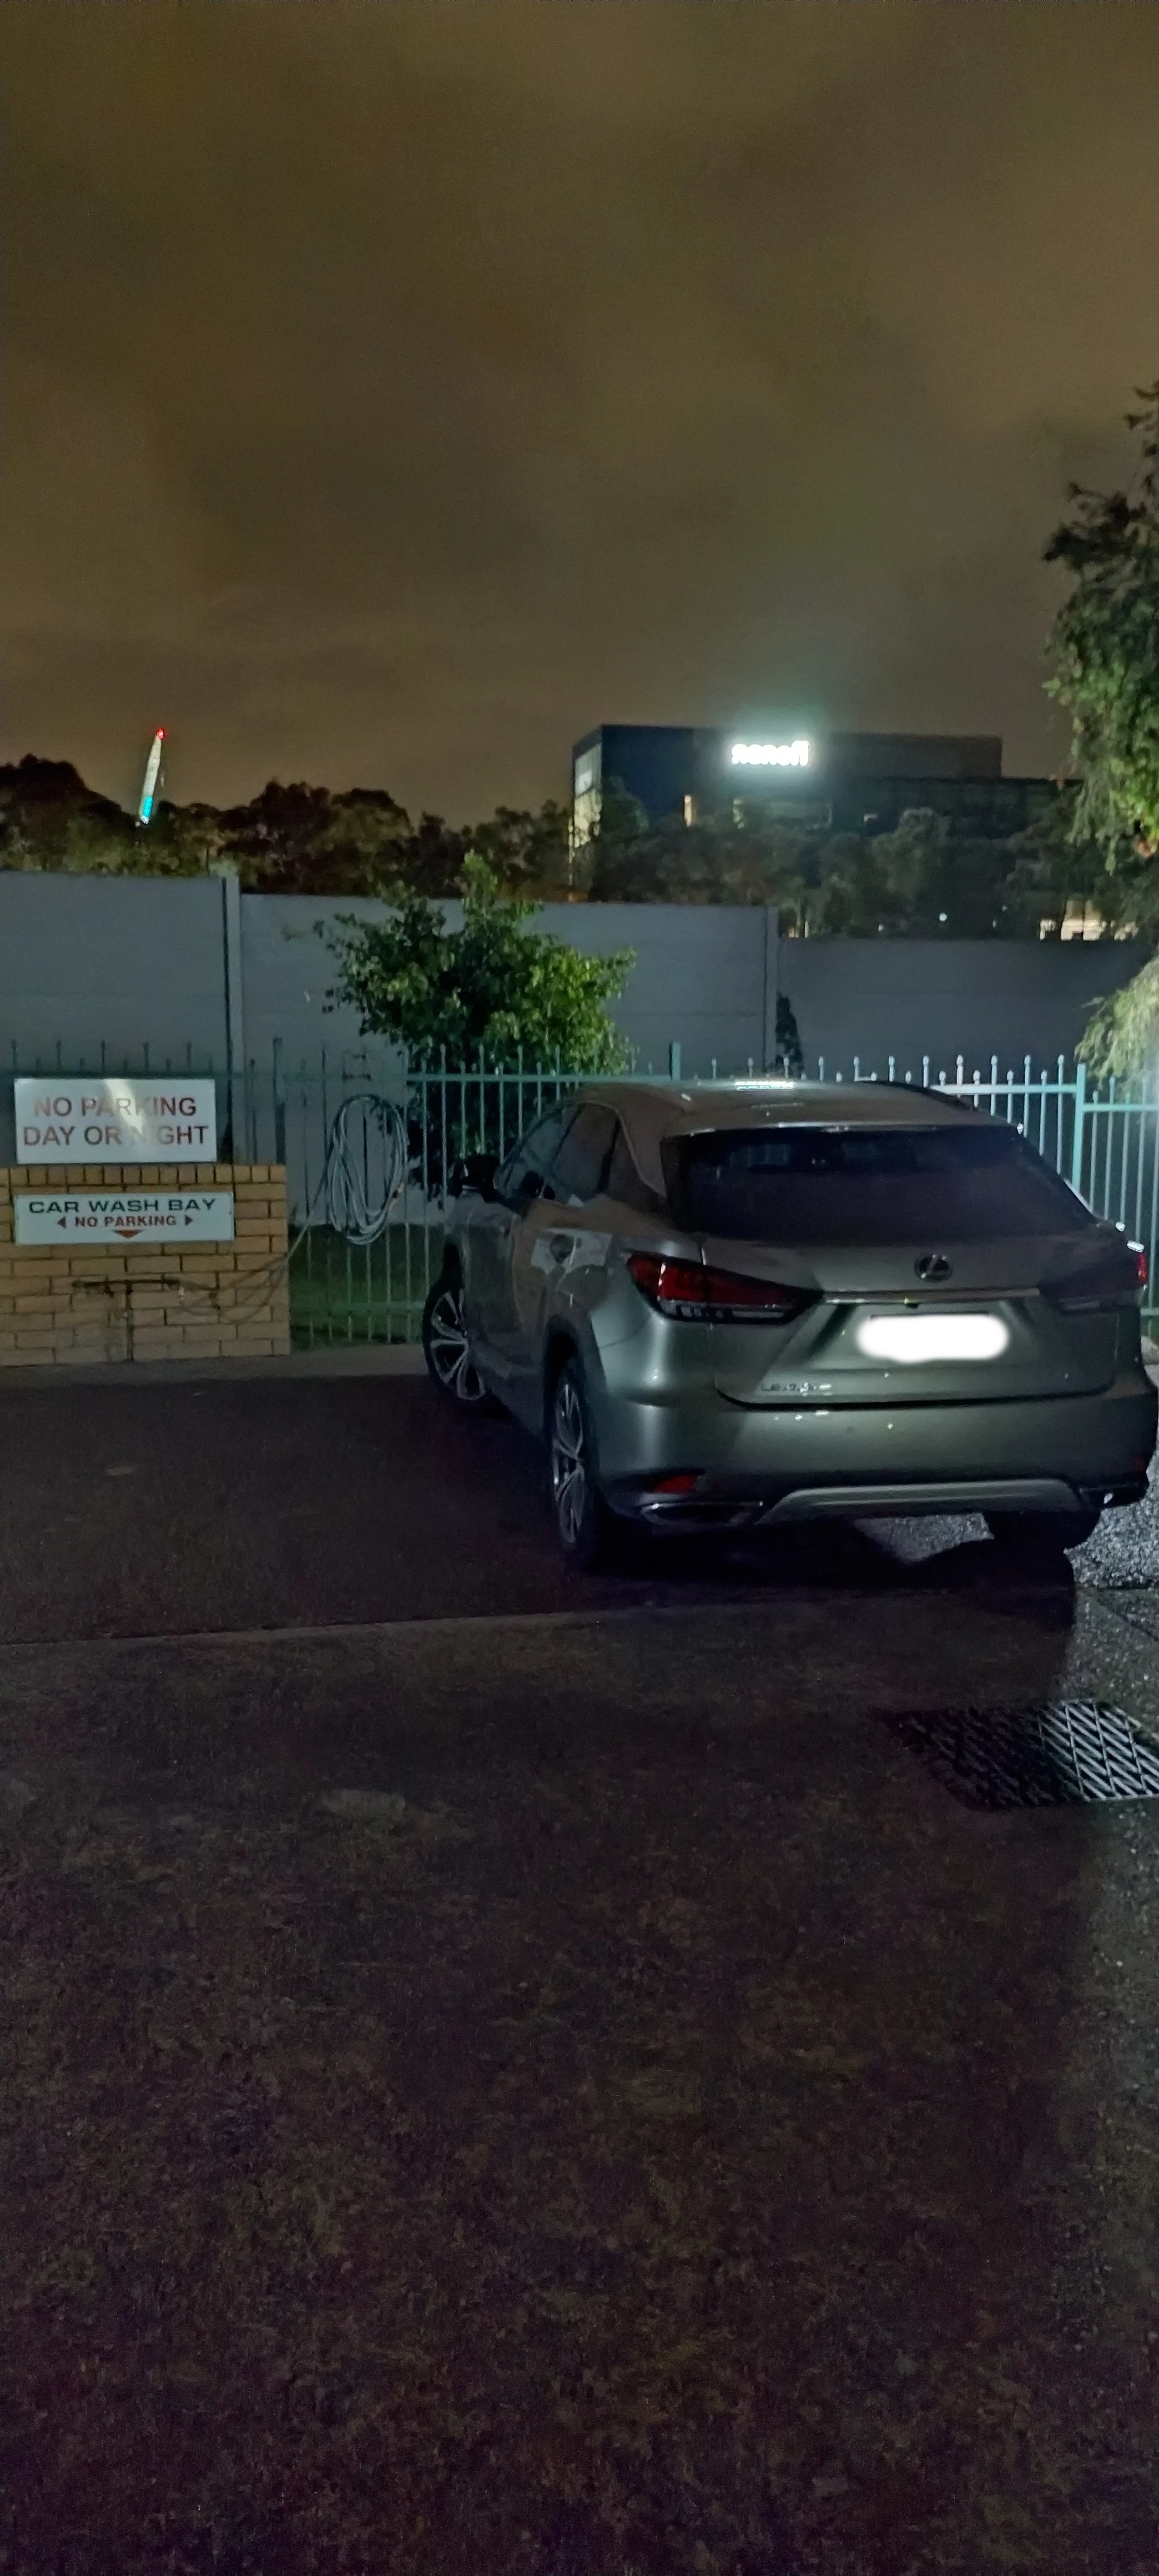 SP52948-illegally-parked-car-in-front-of-committee-member-towhouse-Lot-200-and-carwash-area-photo-5-12Nov2022.webp